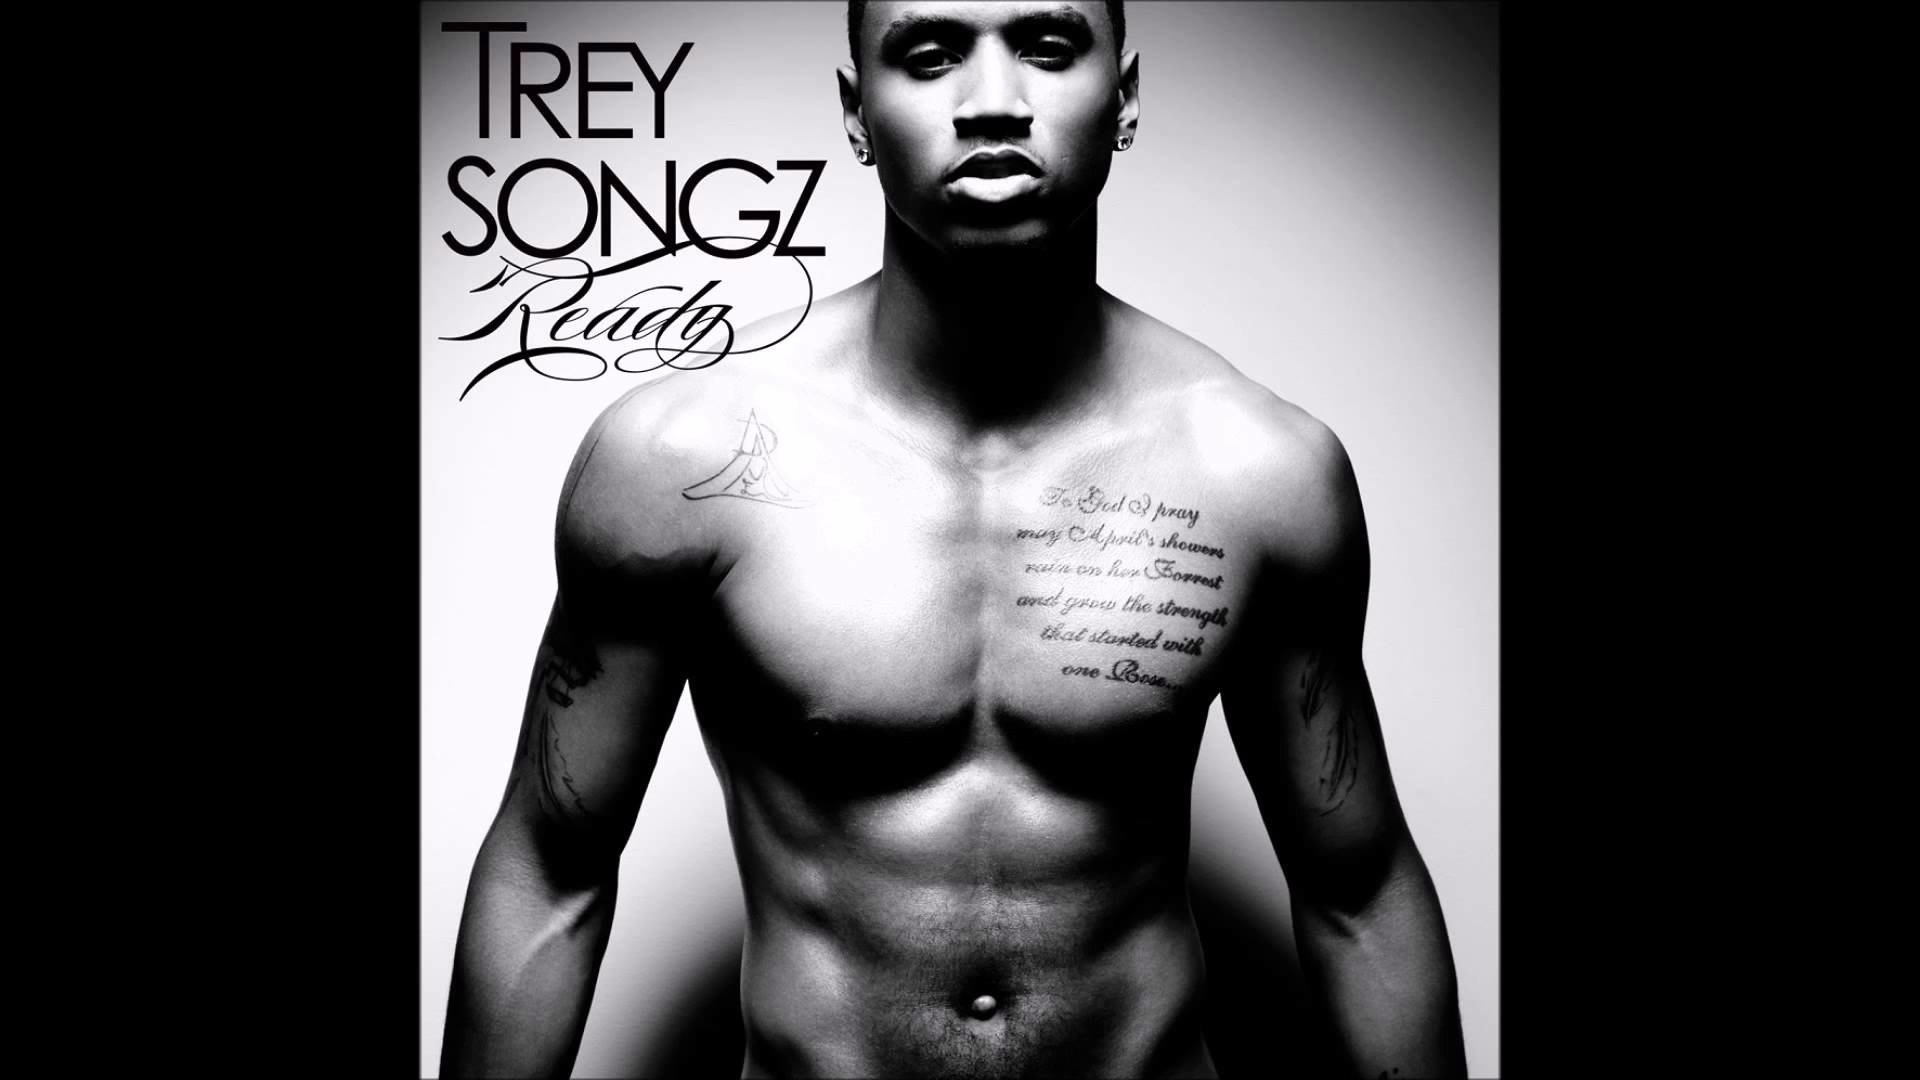 Video trey onlyfans songz The Source